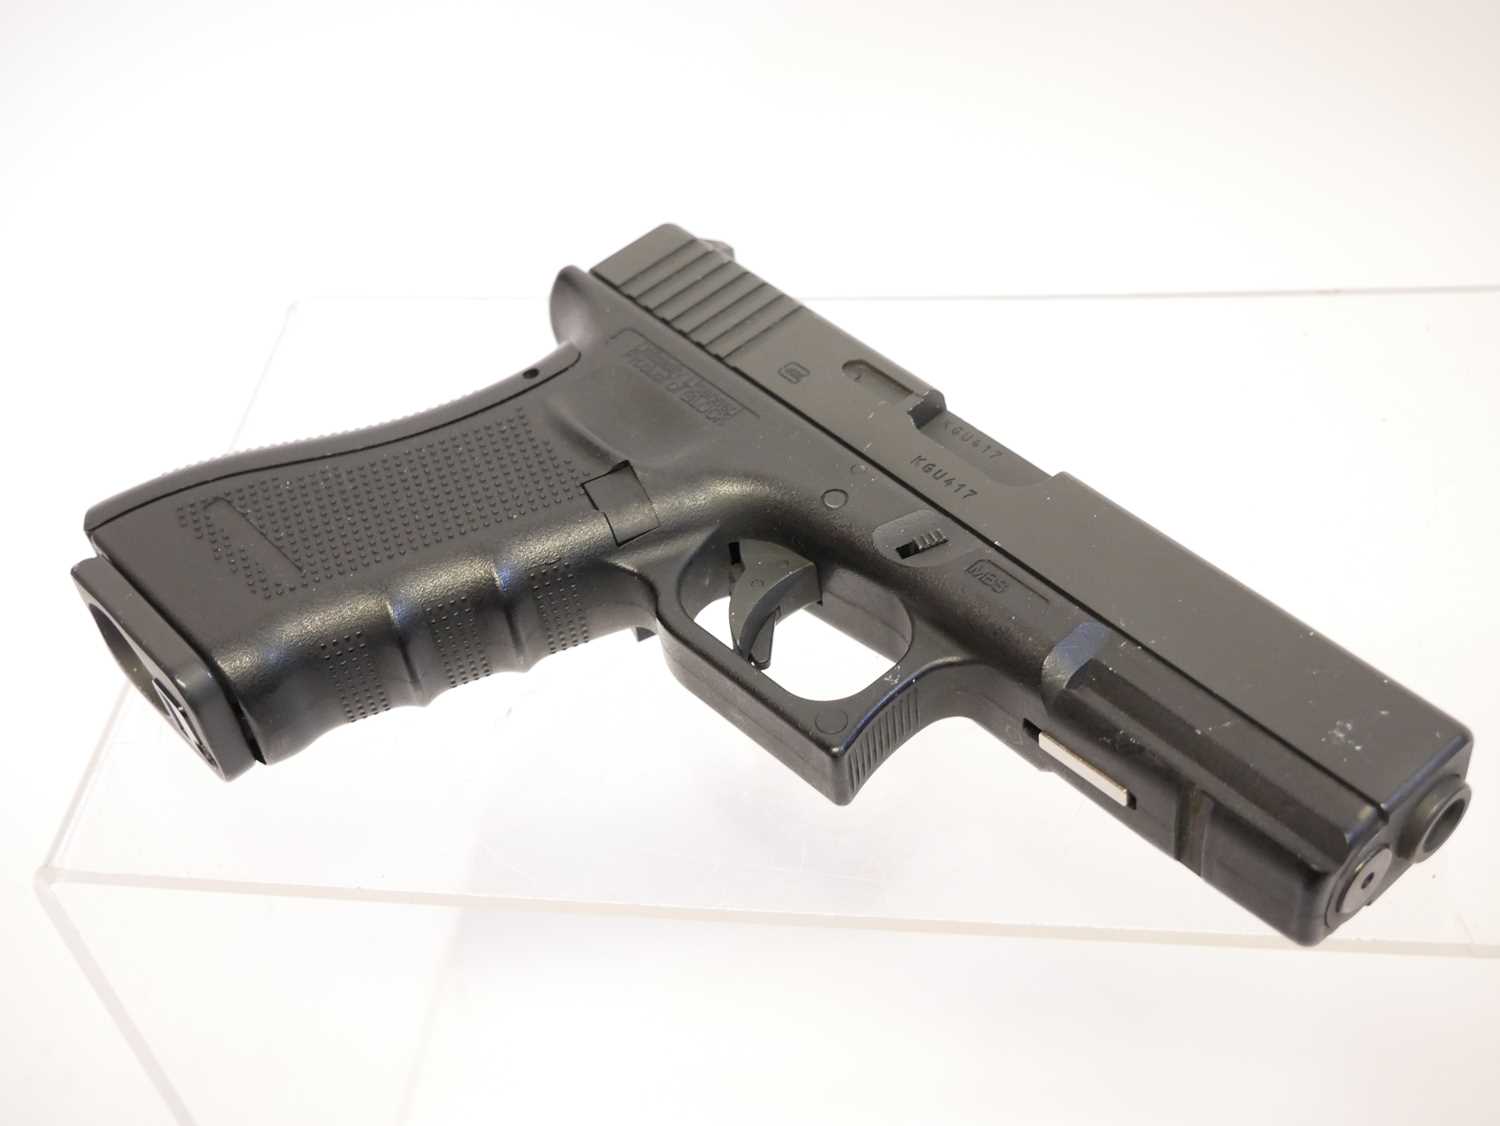 Umarex Glock 17 generation 4 .177 BB CO2 air pistol, serial number KGU417, with box and one - Image 3 of 8